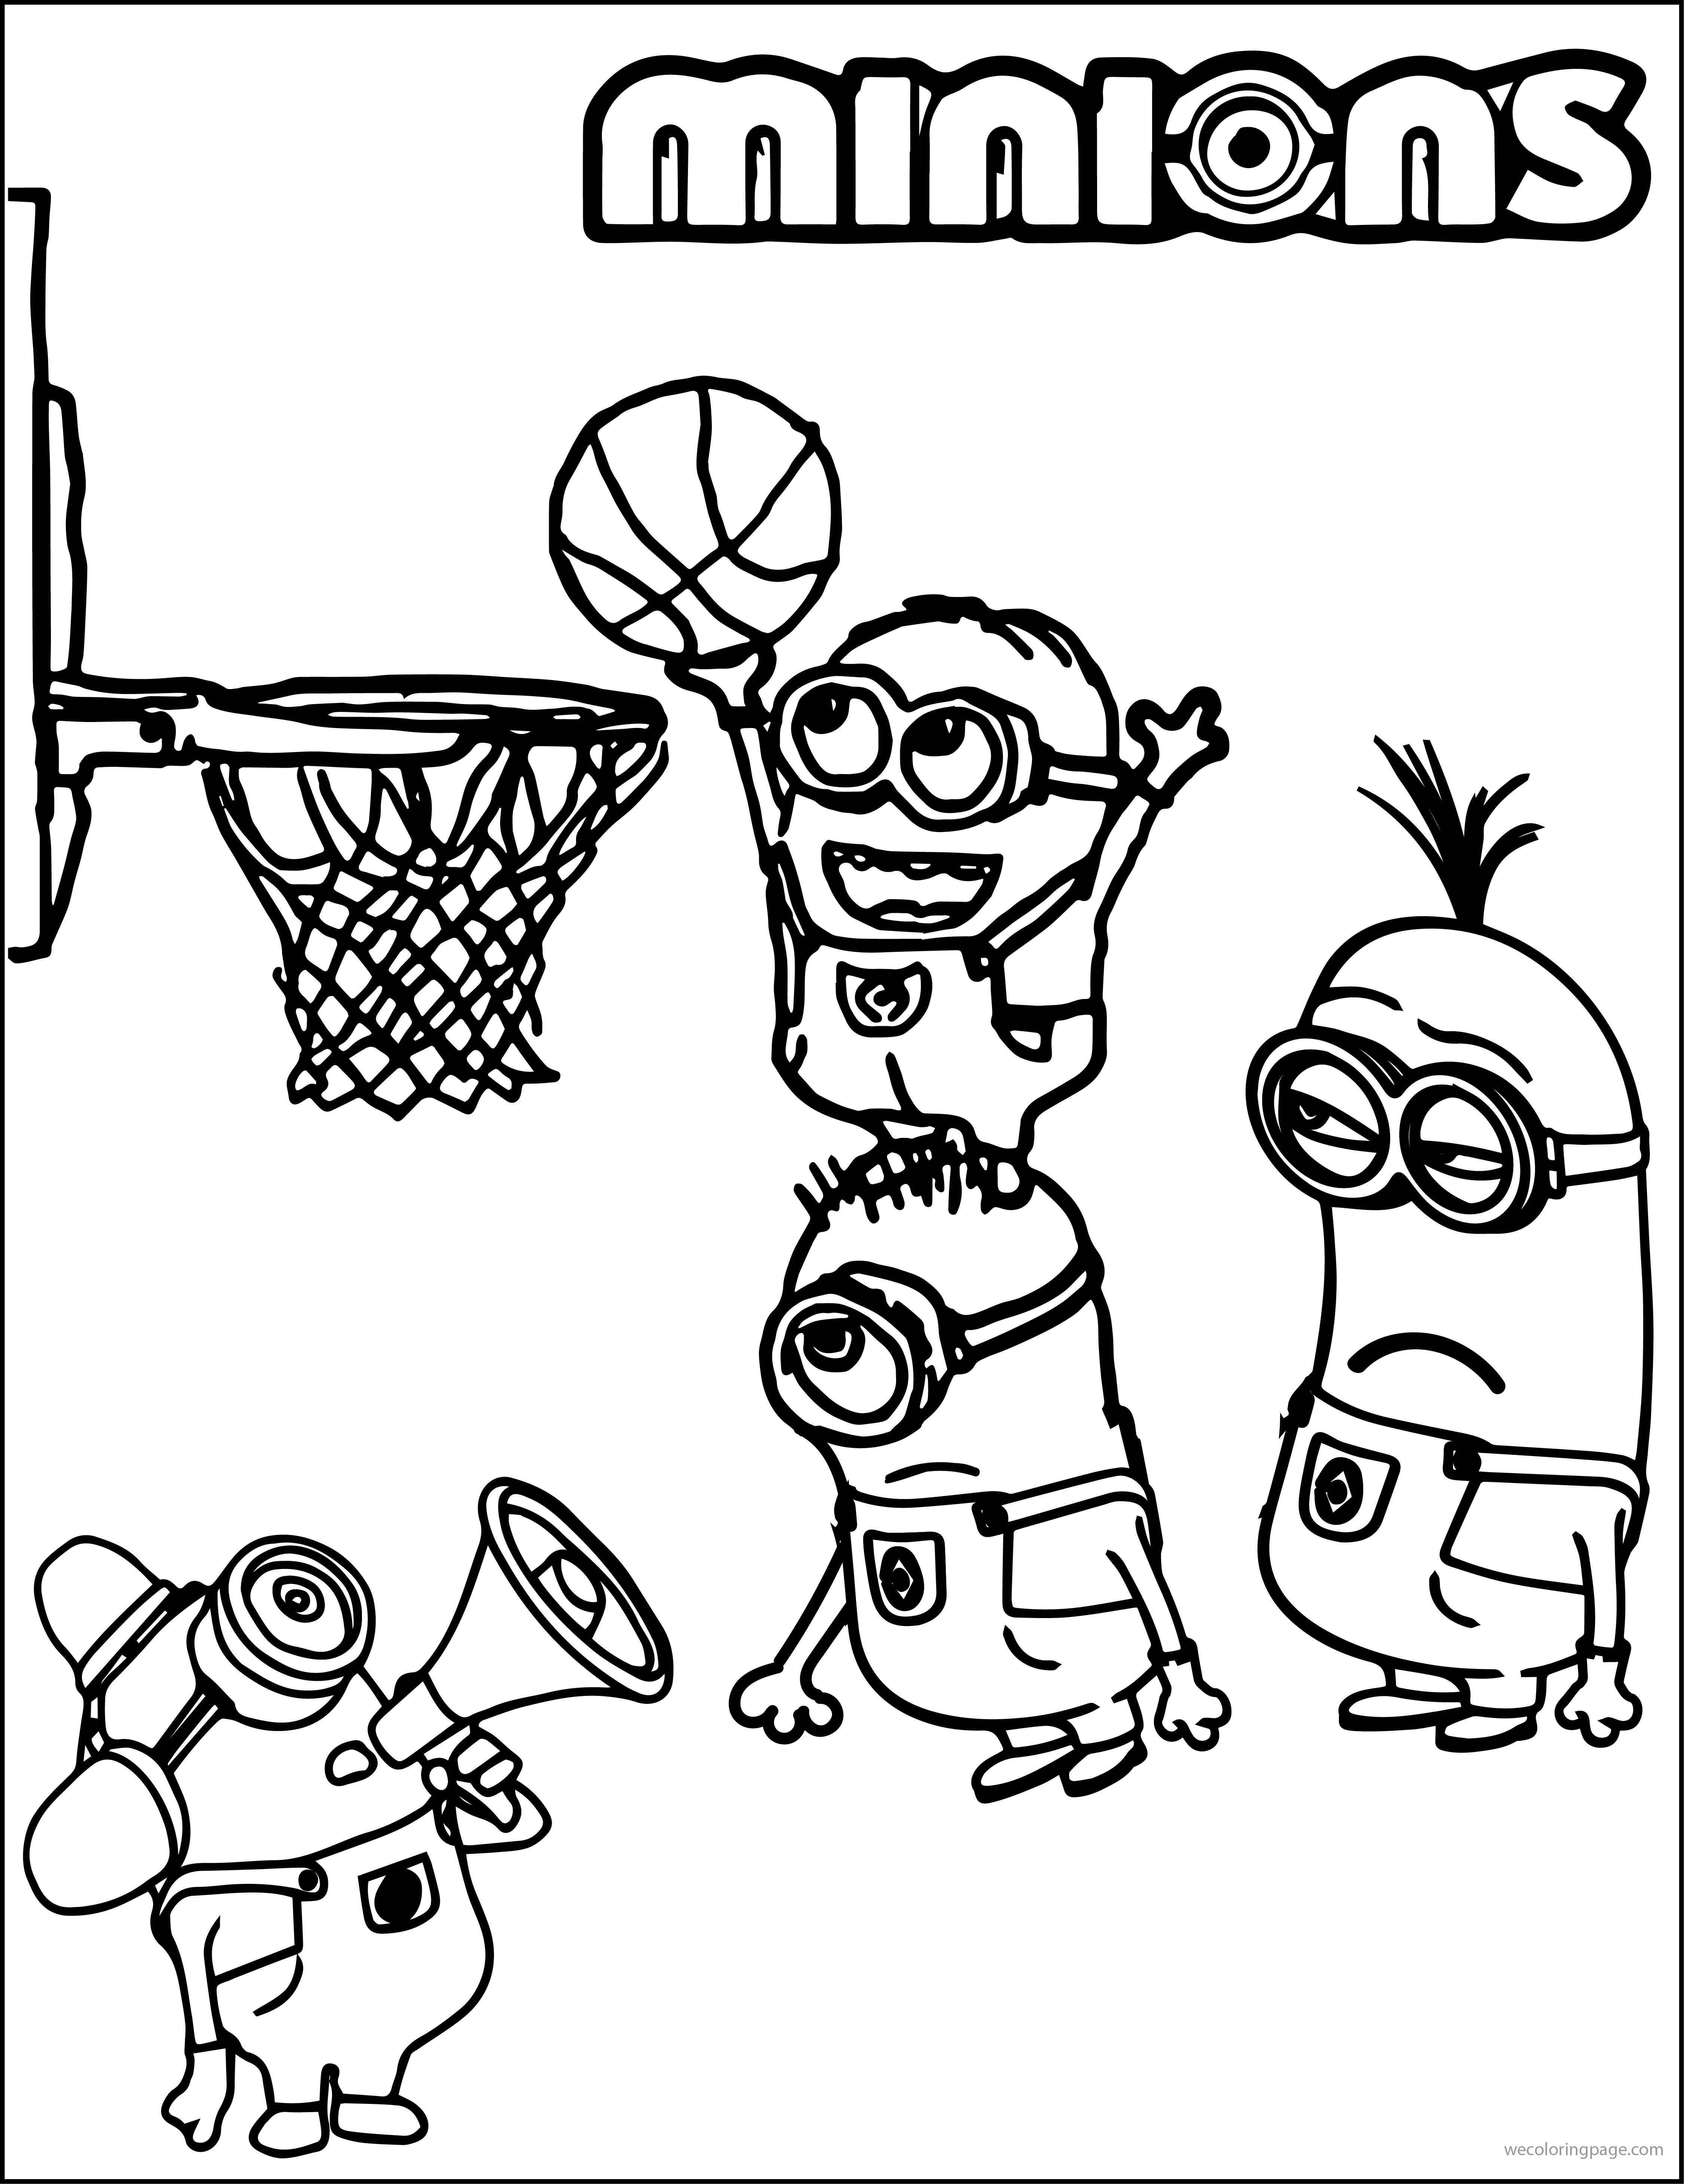 Free Coloring Pages For Boys+Sports
 Minion Playing Basketball Coloring Pages